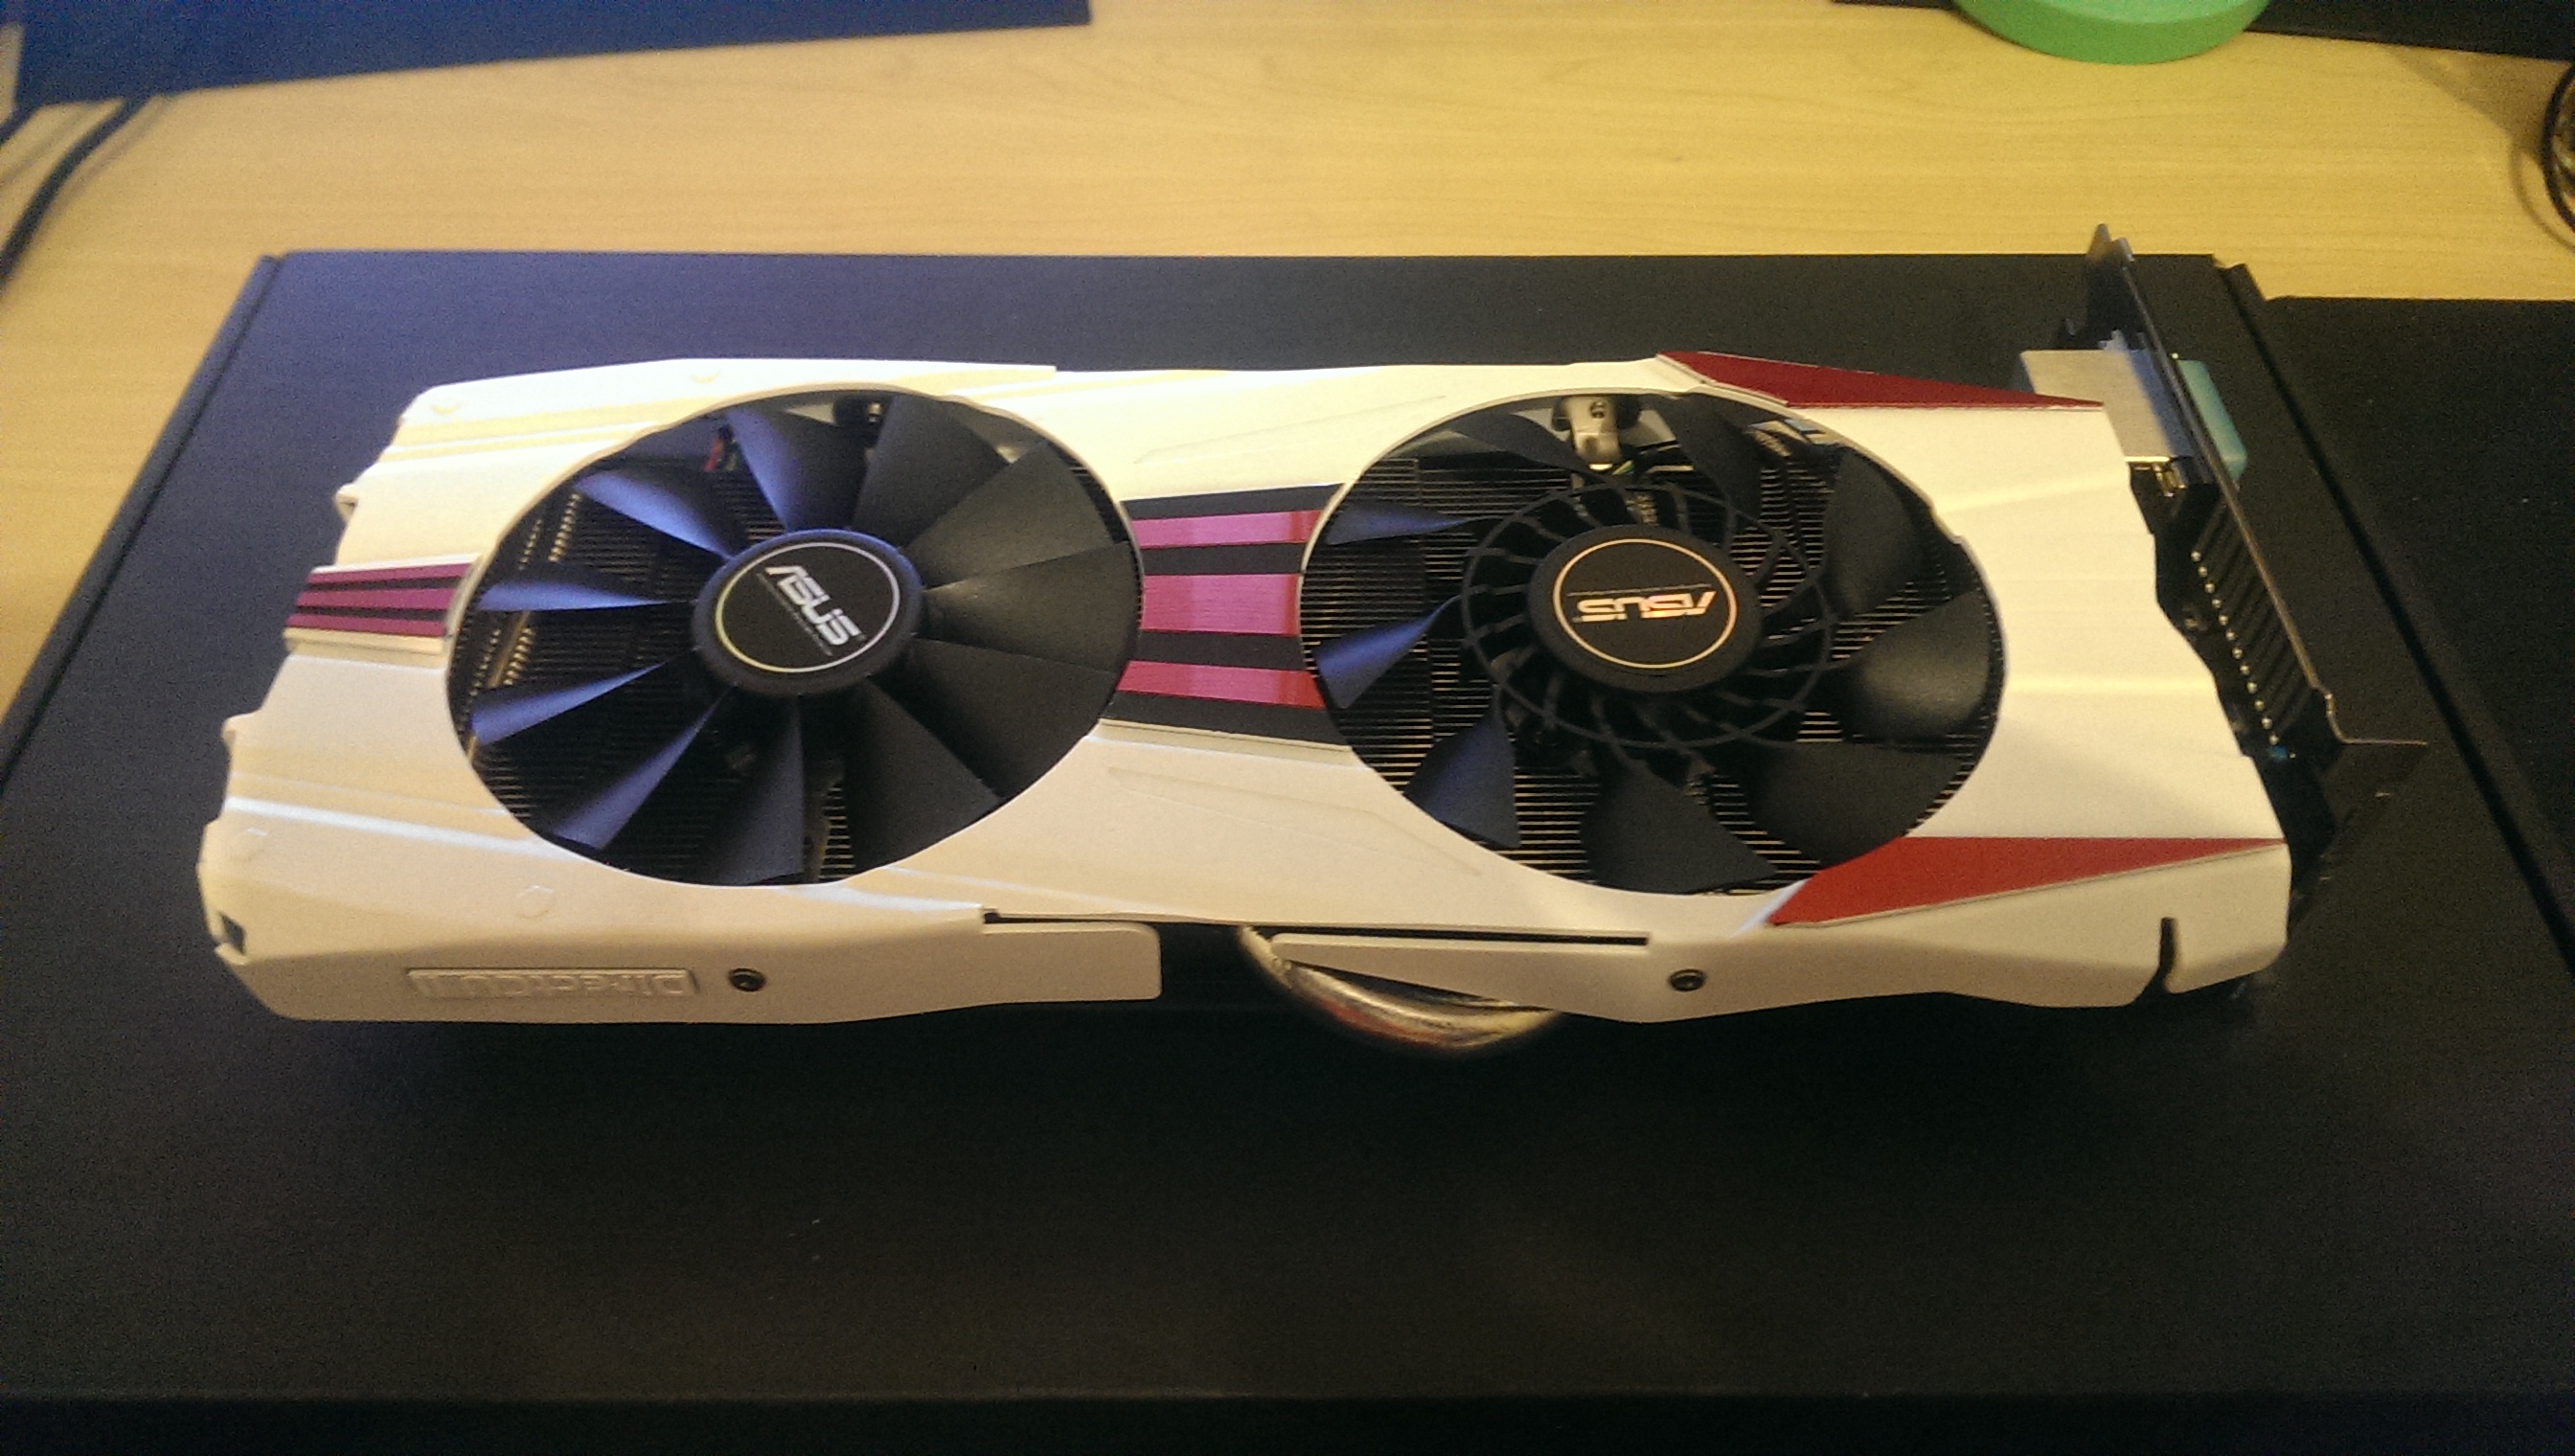 My painted R9 280X DCU2 TOP